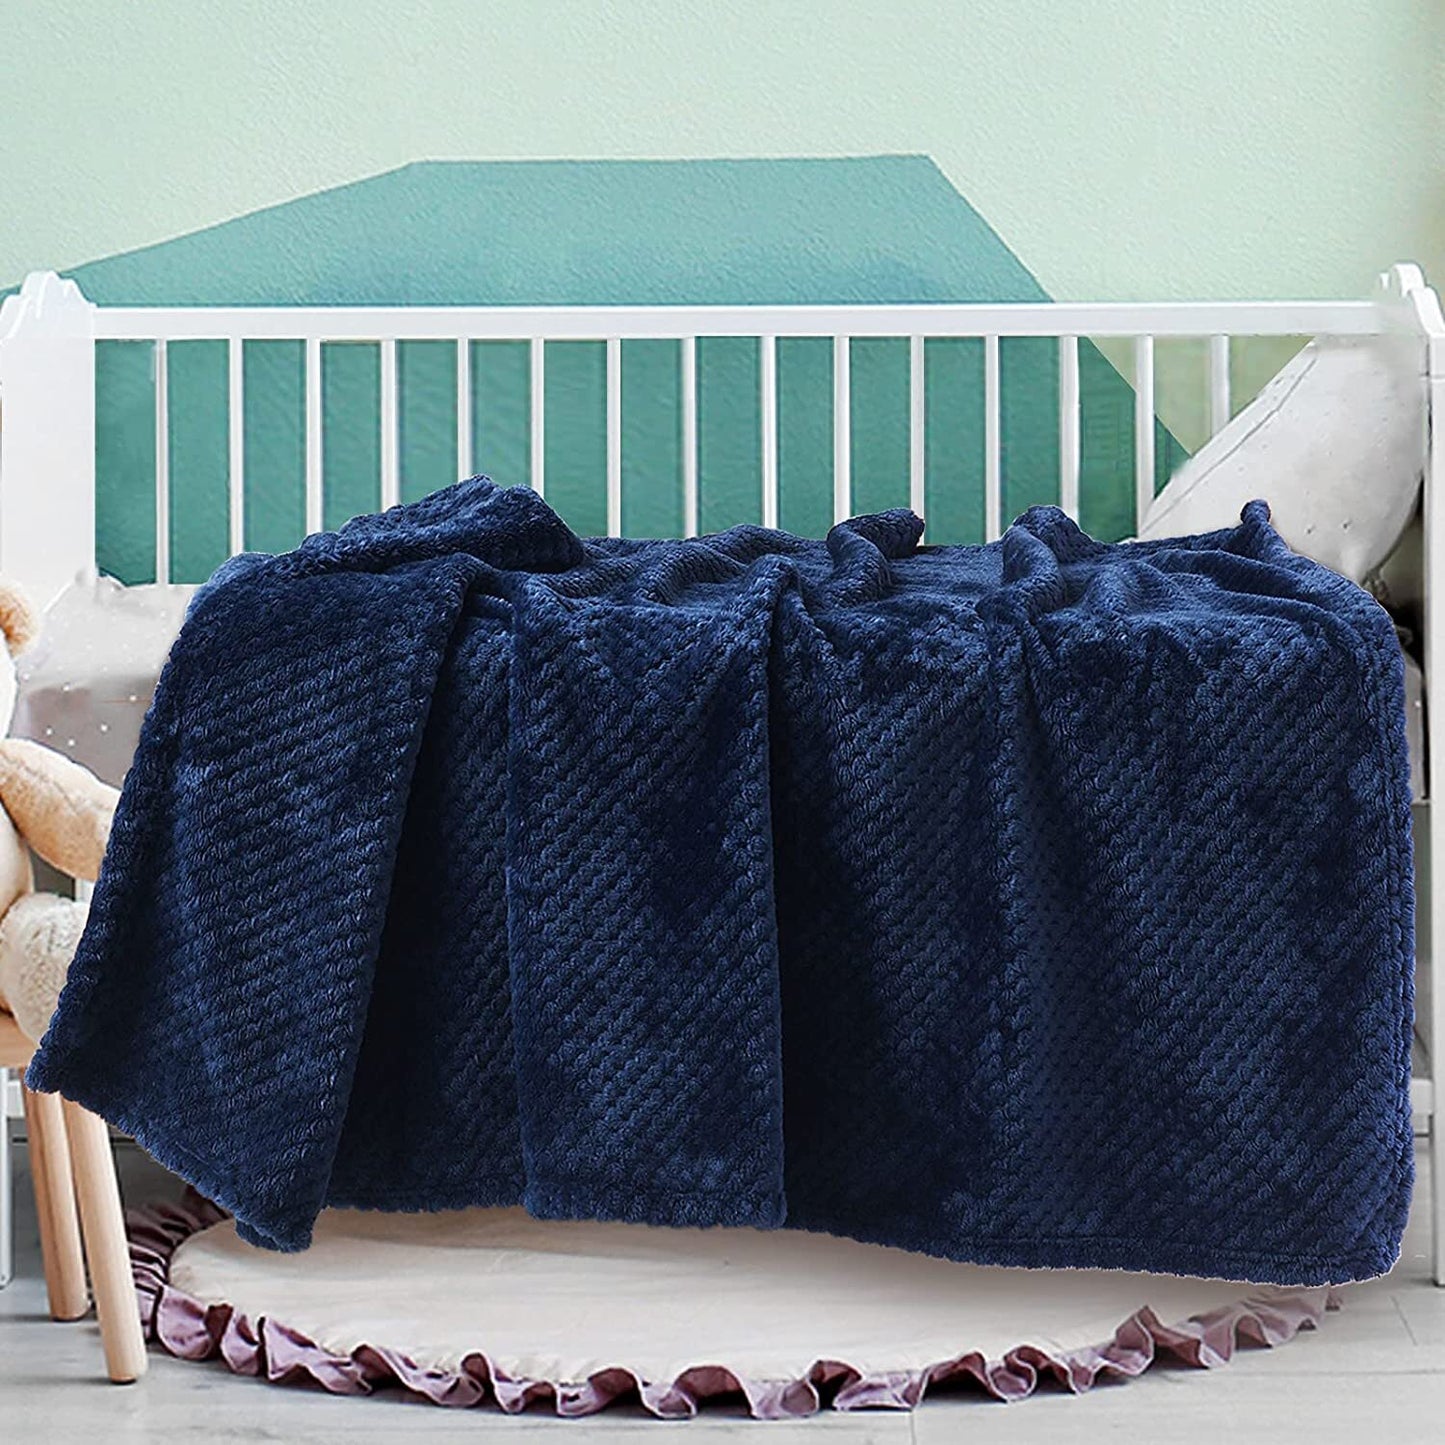 Exclusivo Mezcla Waffle Textured Fleece Baby Blanket, Soft and Warm Swaddle Blanket, Infant, Newborn, Toddler and Kids Receiving Blankets for Crib Stroller (Navy Blue, 40x50 inches)